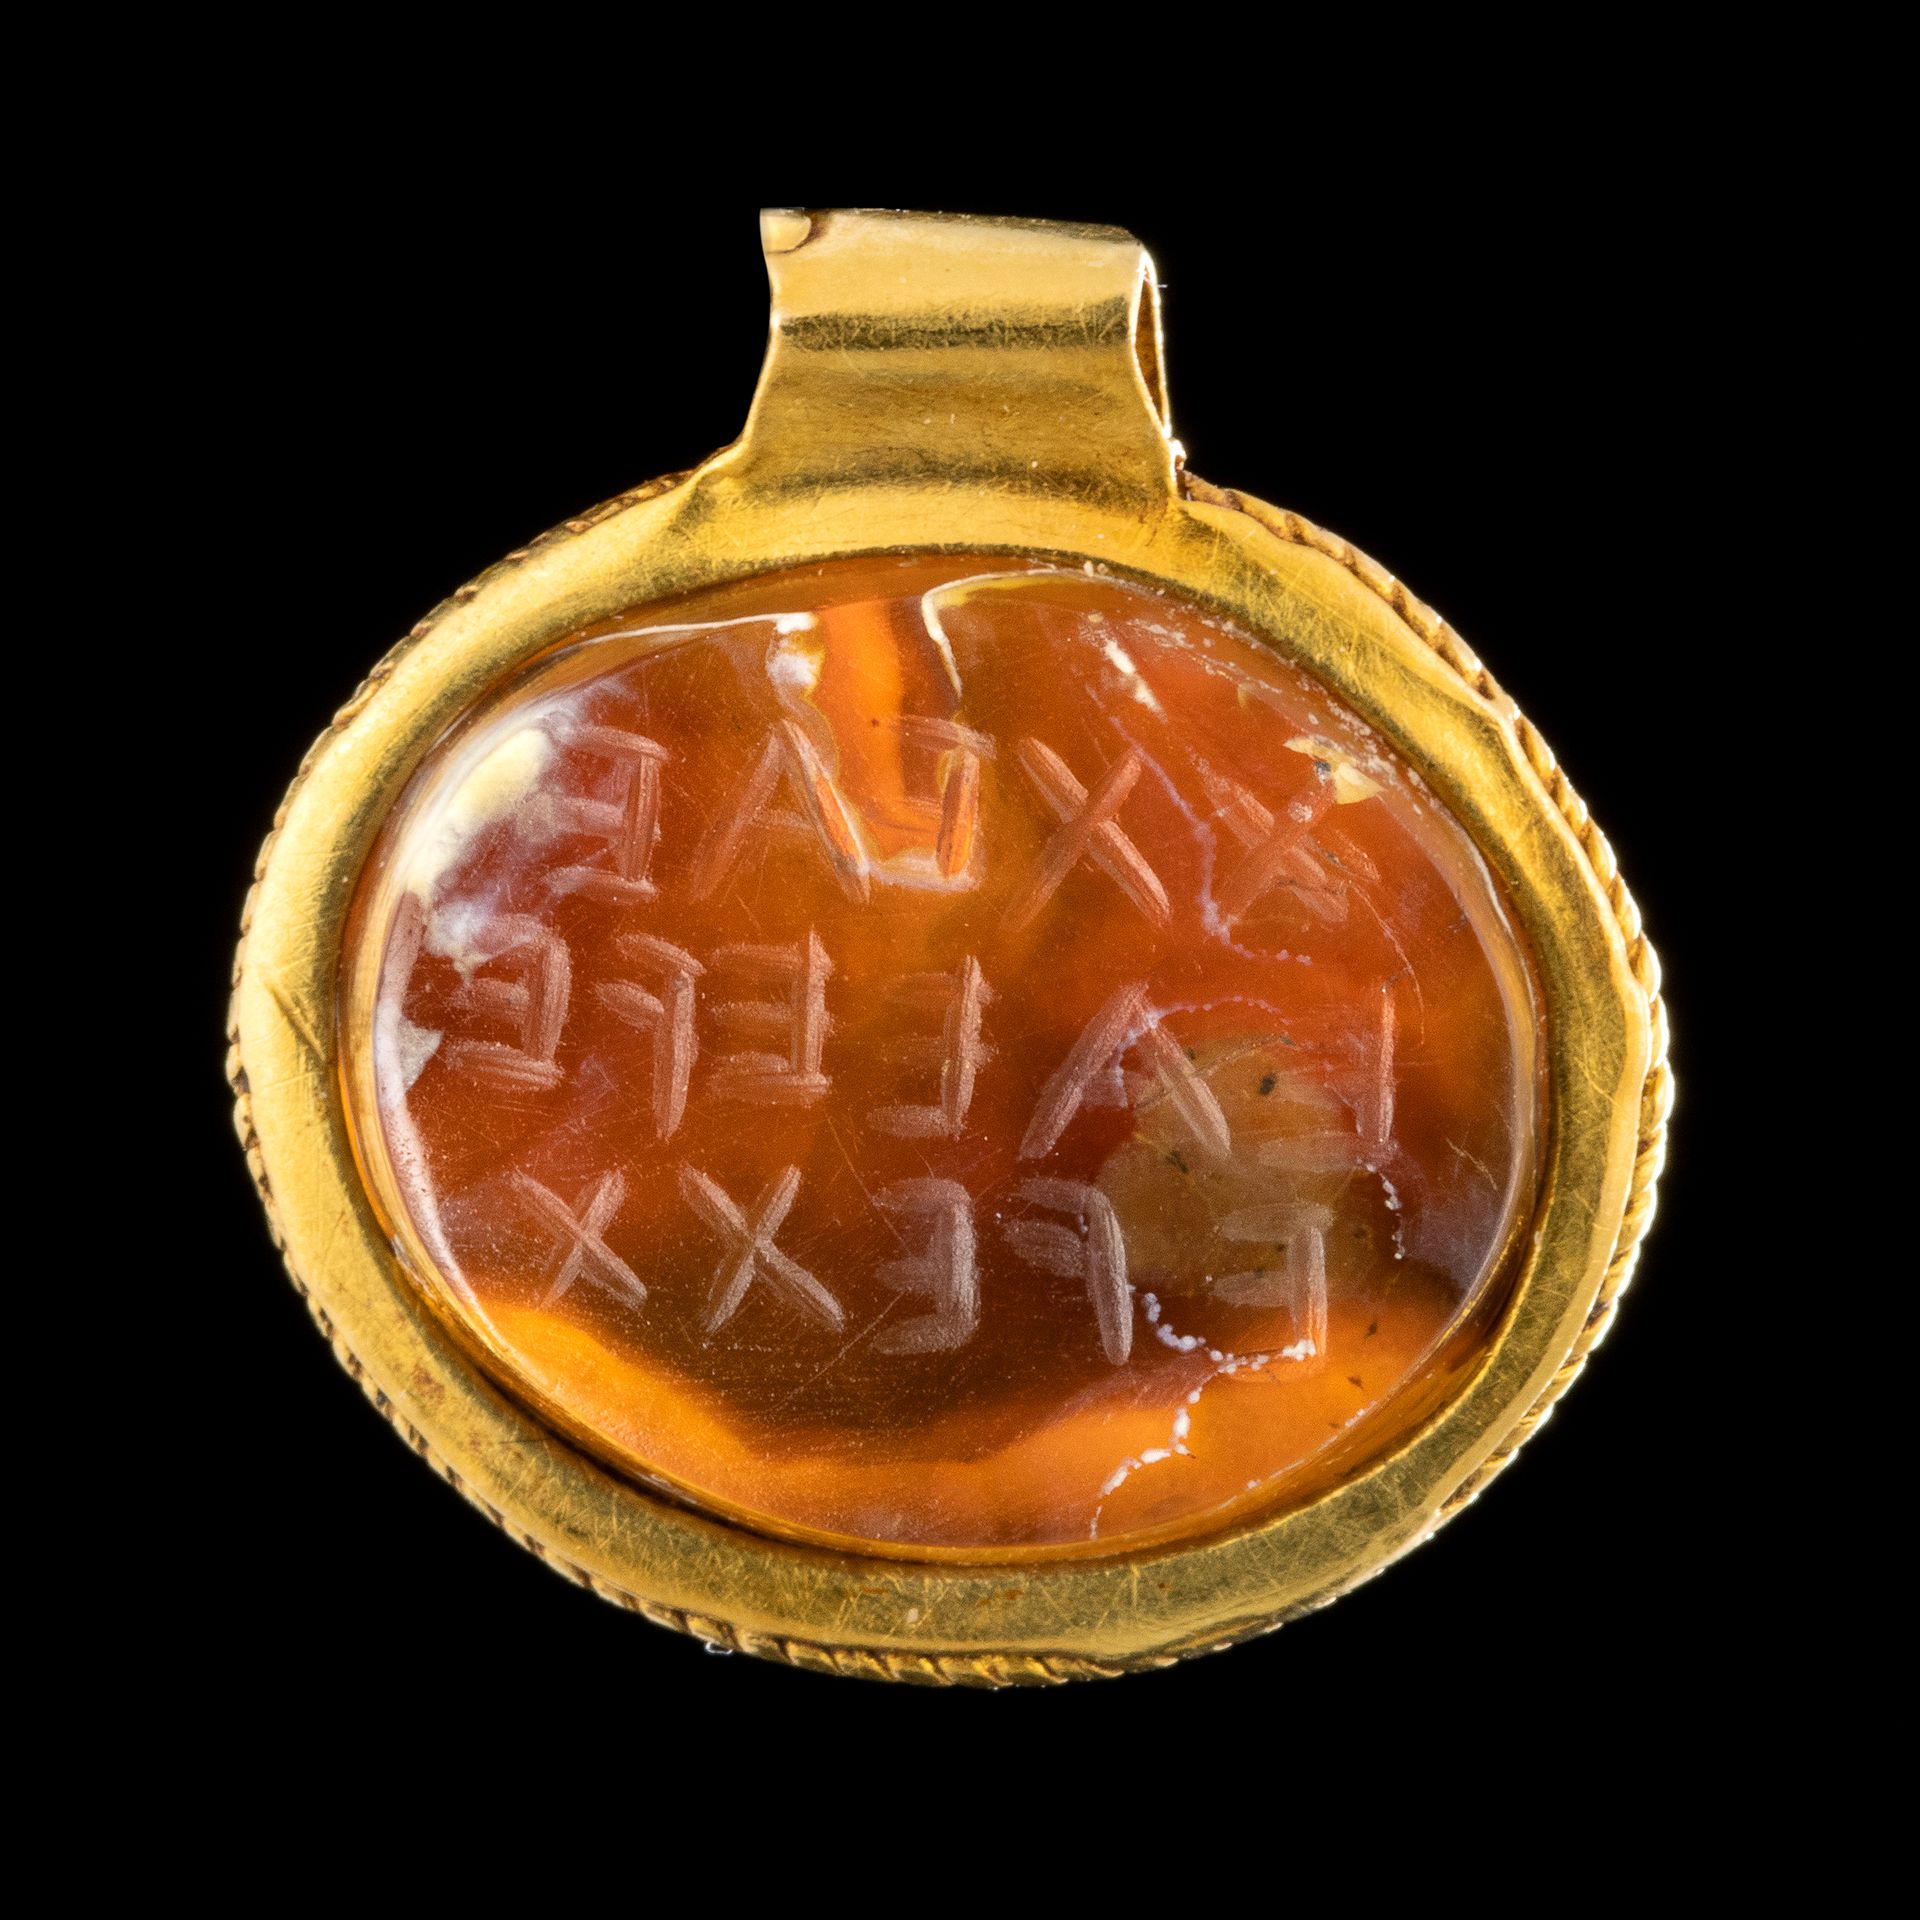 Null GNOSTIC PENDANT
in gold set with an intaglio on agate with magical inscript&hellip;